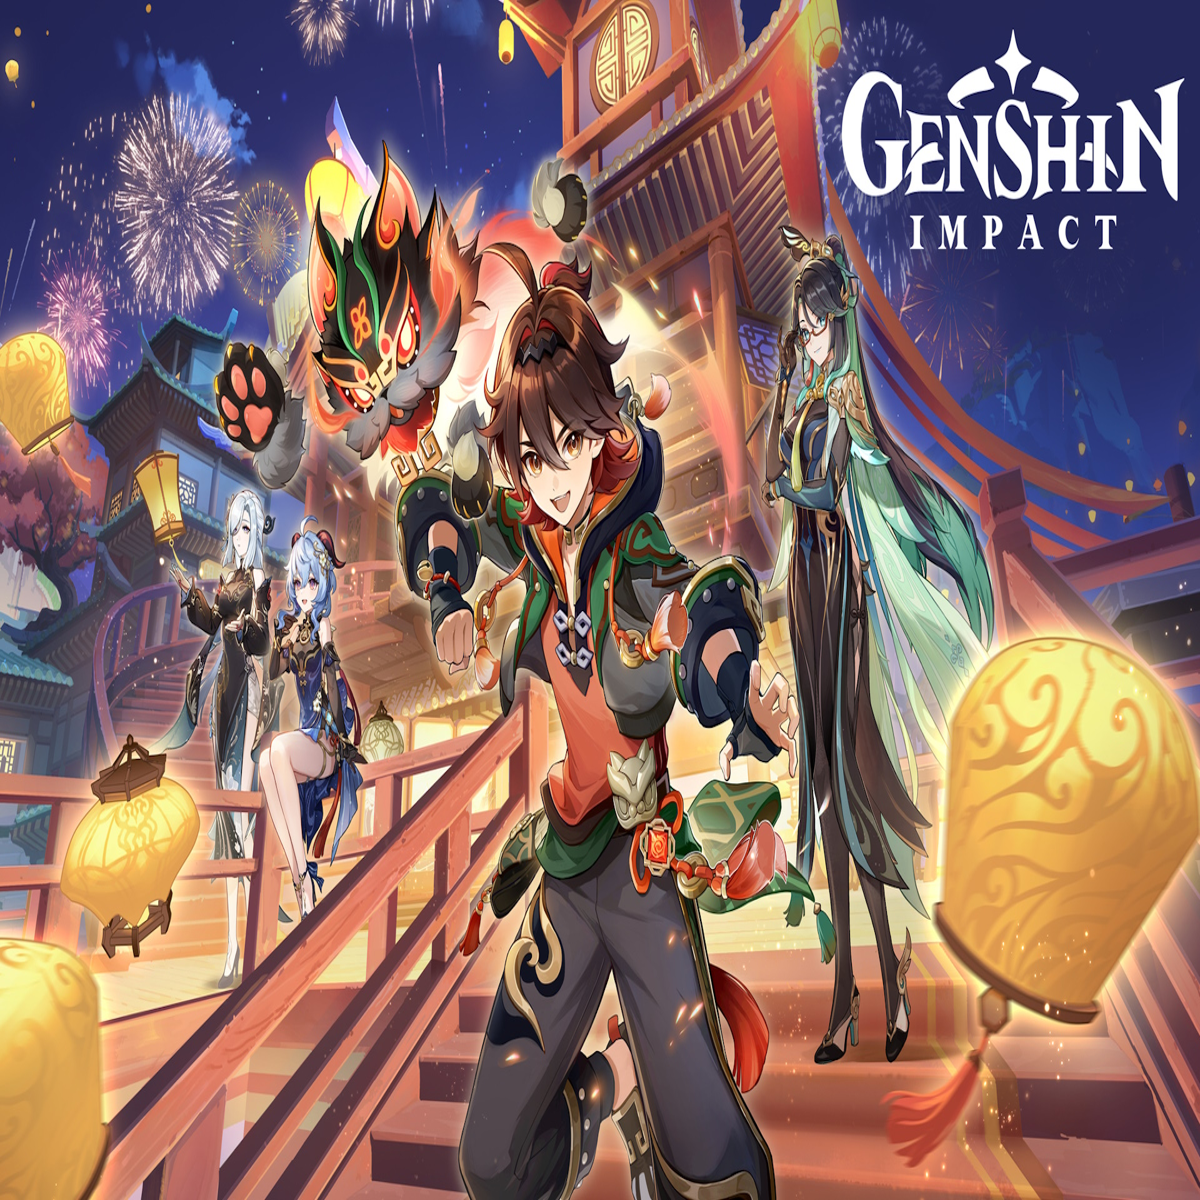 Genshin Impact' Update to Add 4 New Characters and Reputation System